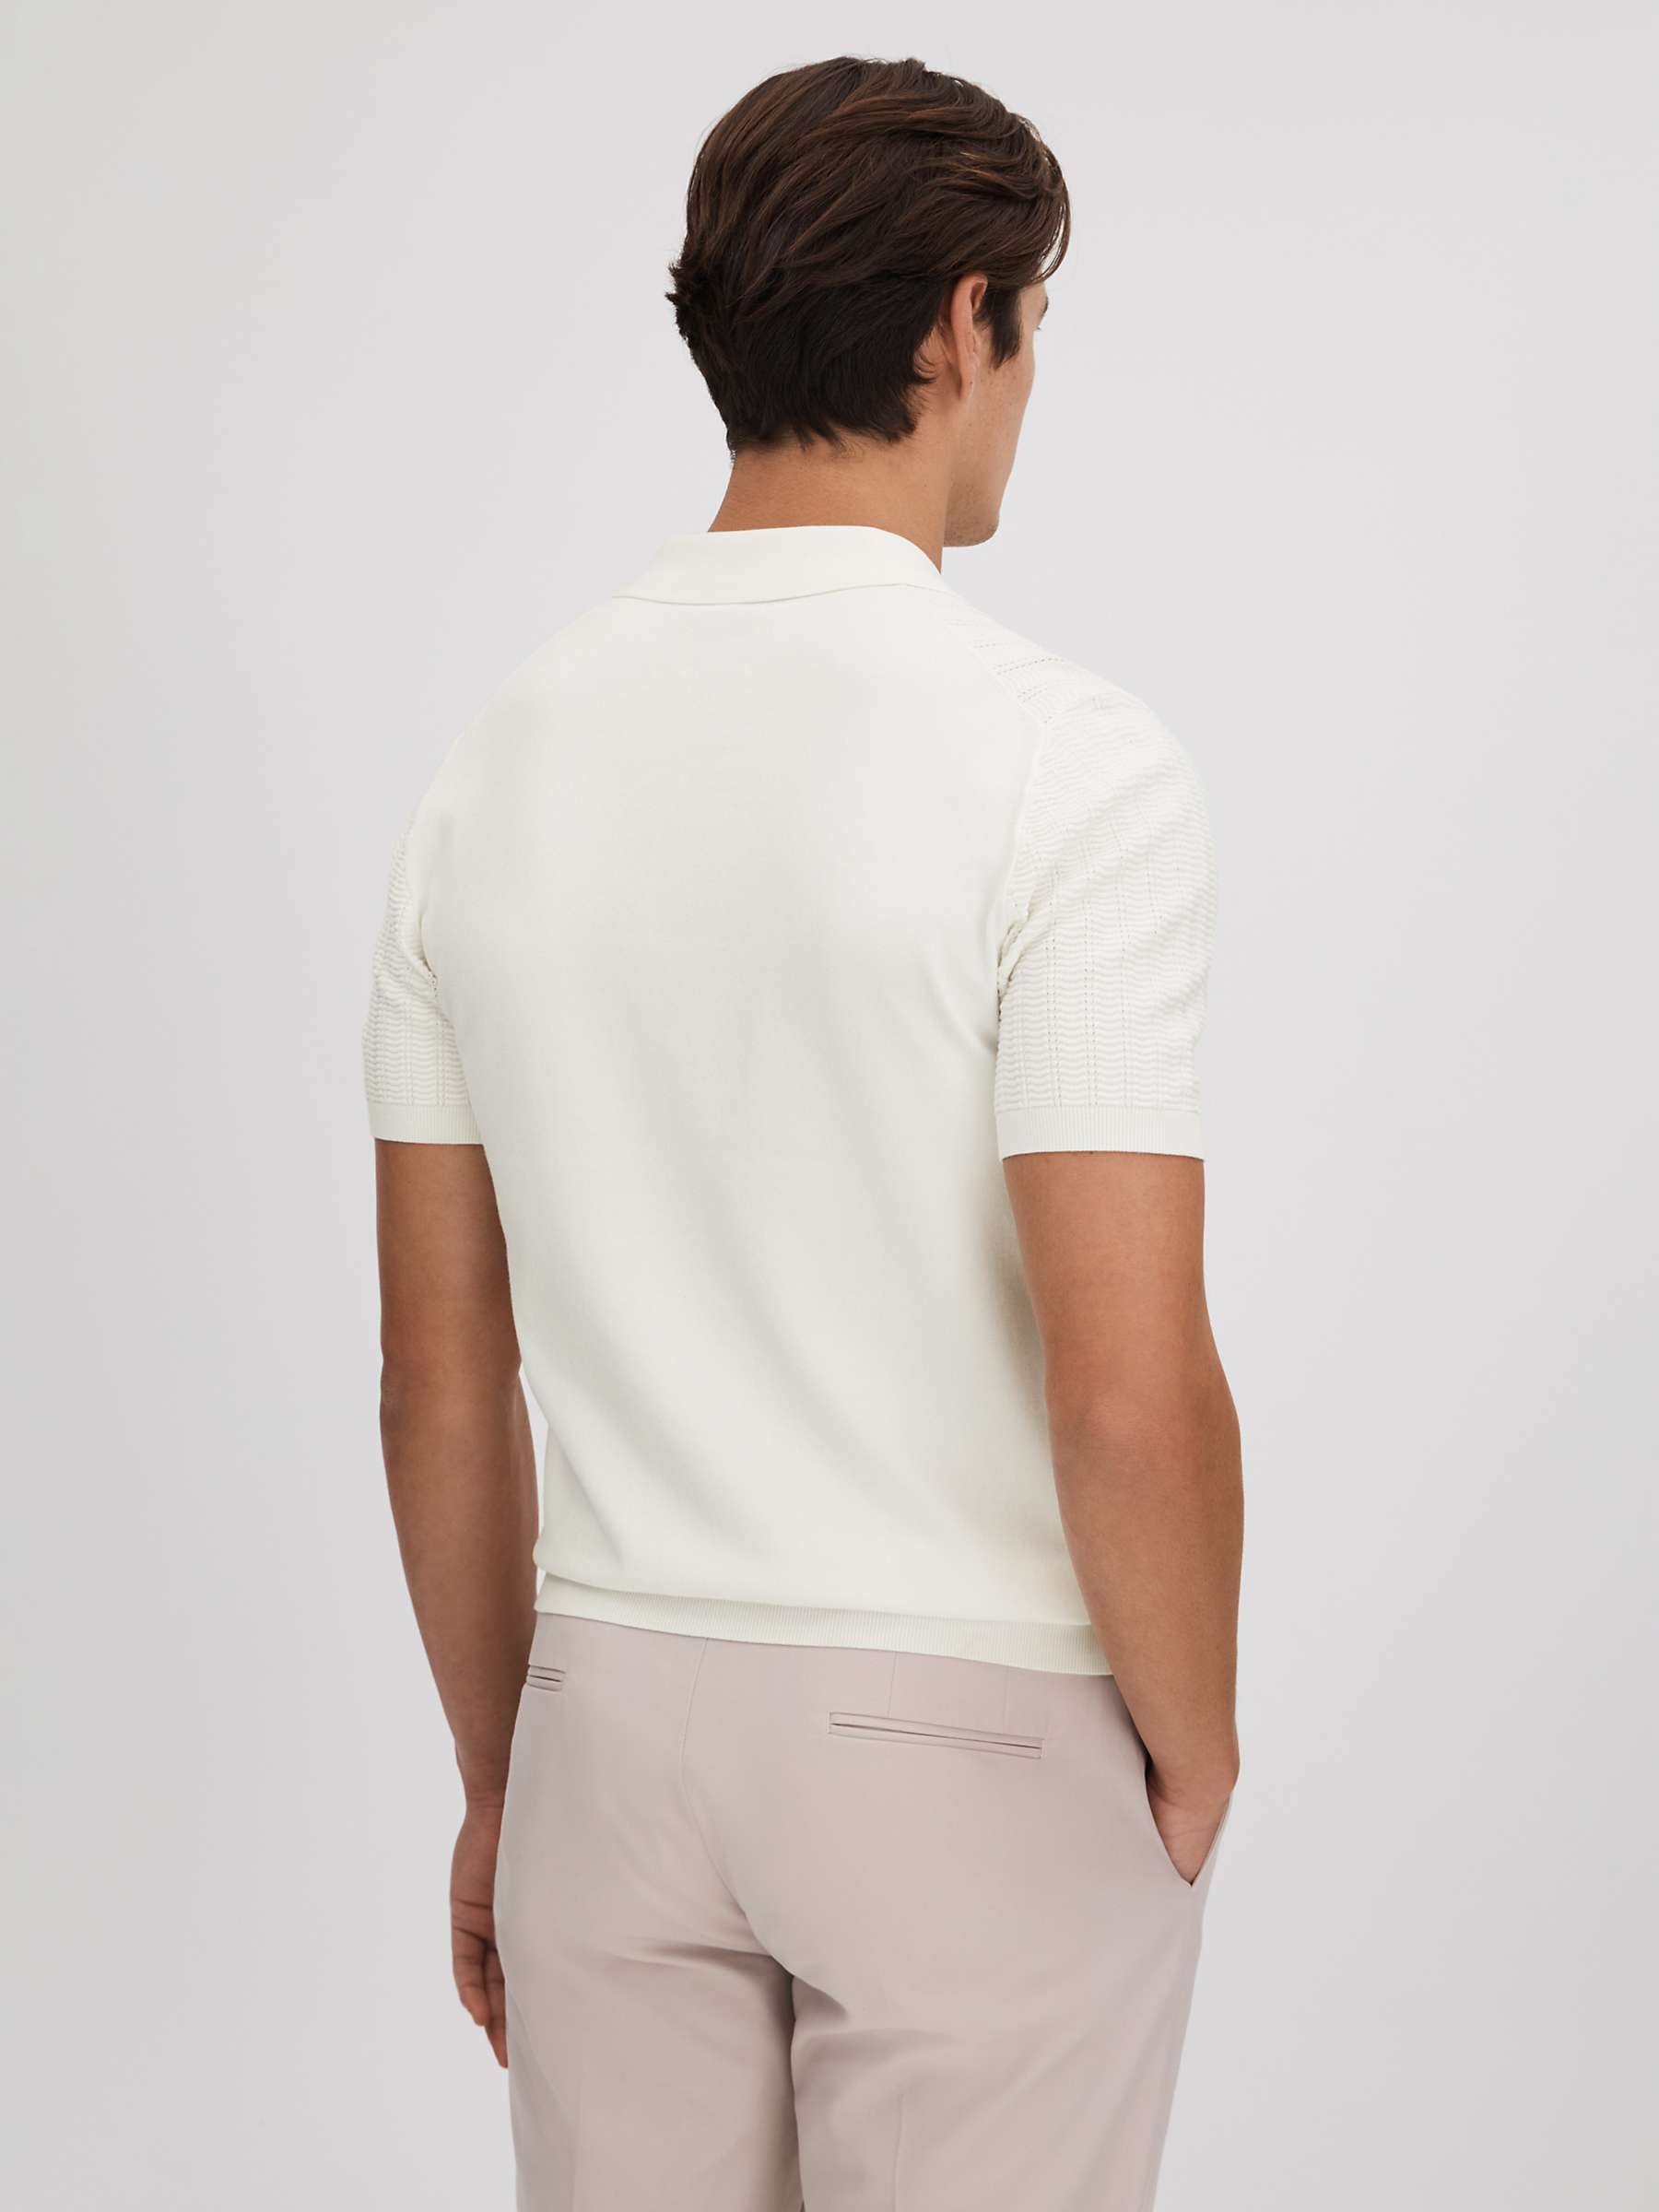 Buy Reiss Pascoe Short Sleeve Polo Top Online at johnlewis.com